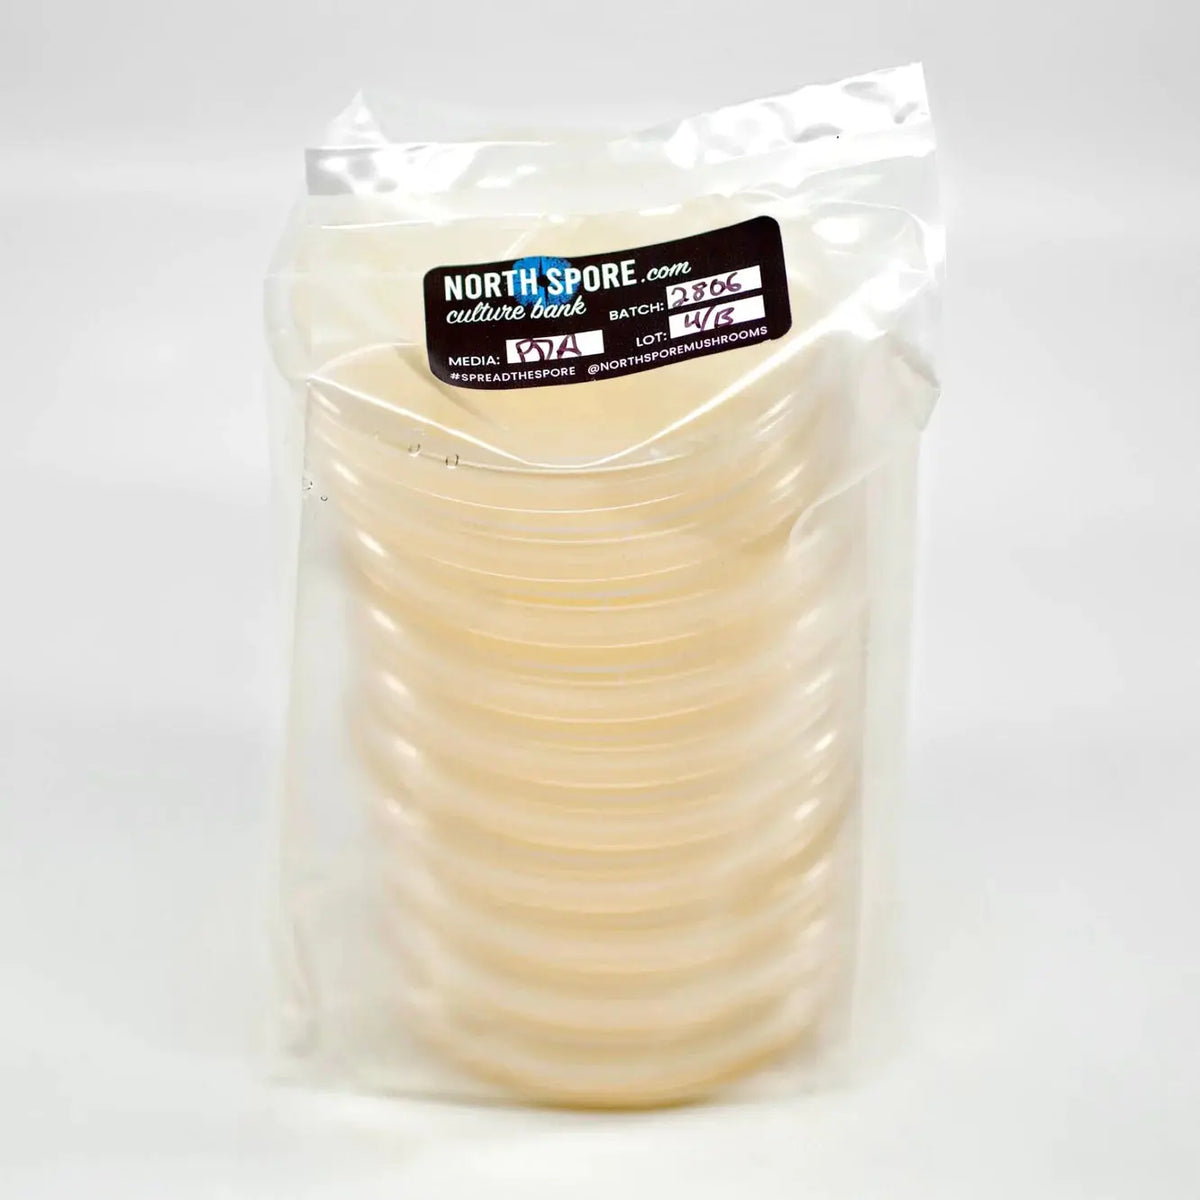 NORTH SPORE Pre-Poured Sterile Agar Plates for Mushroom Cultures, Pack of 10